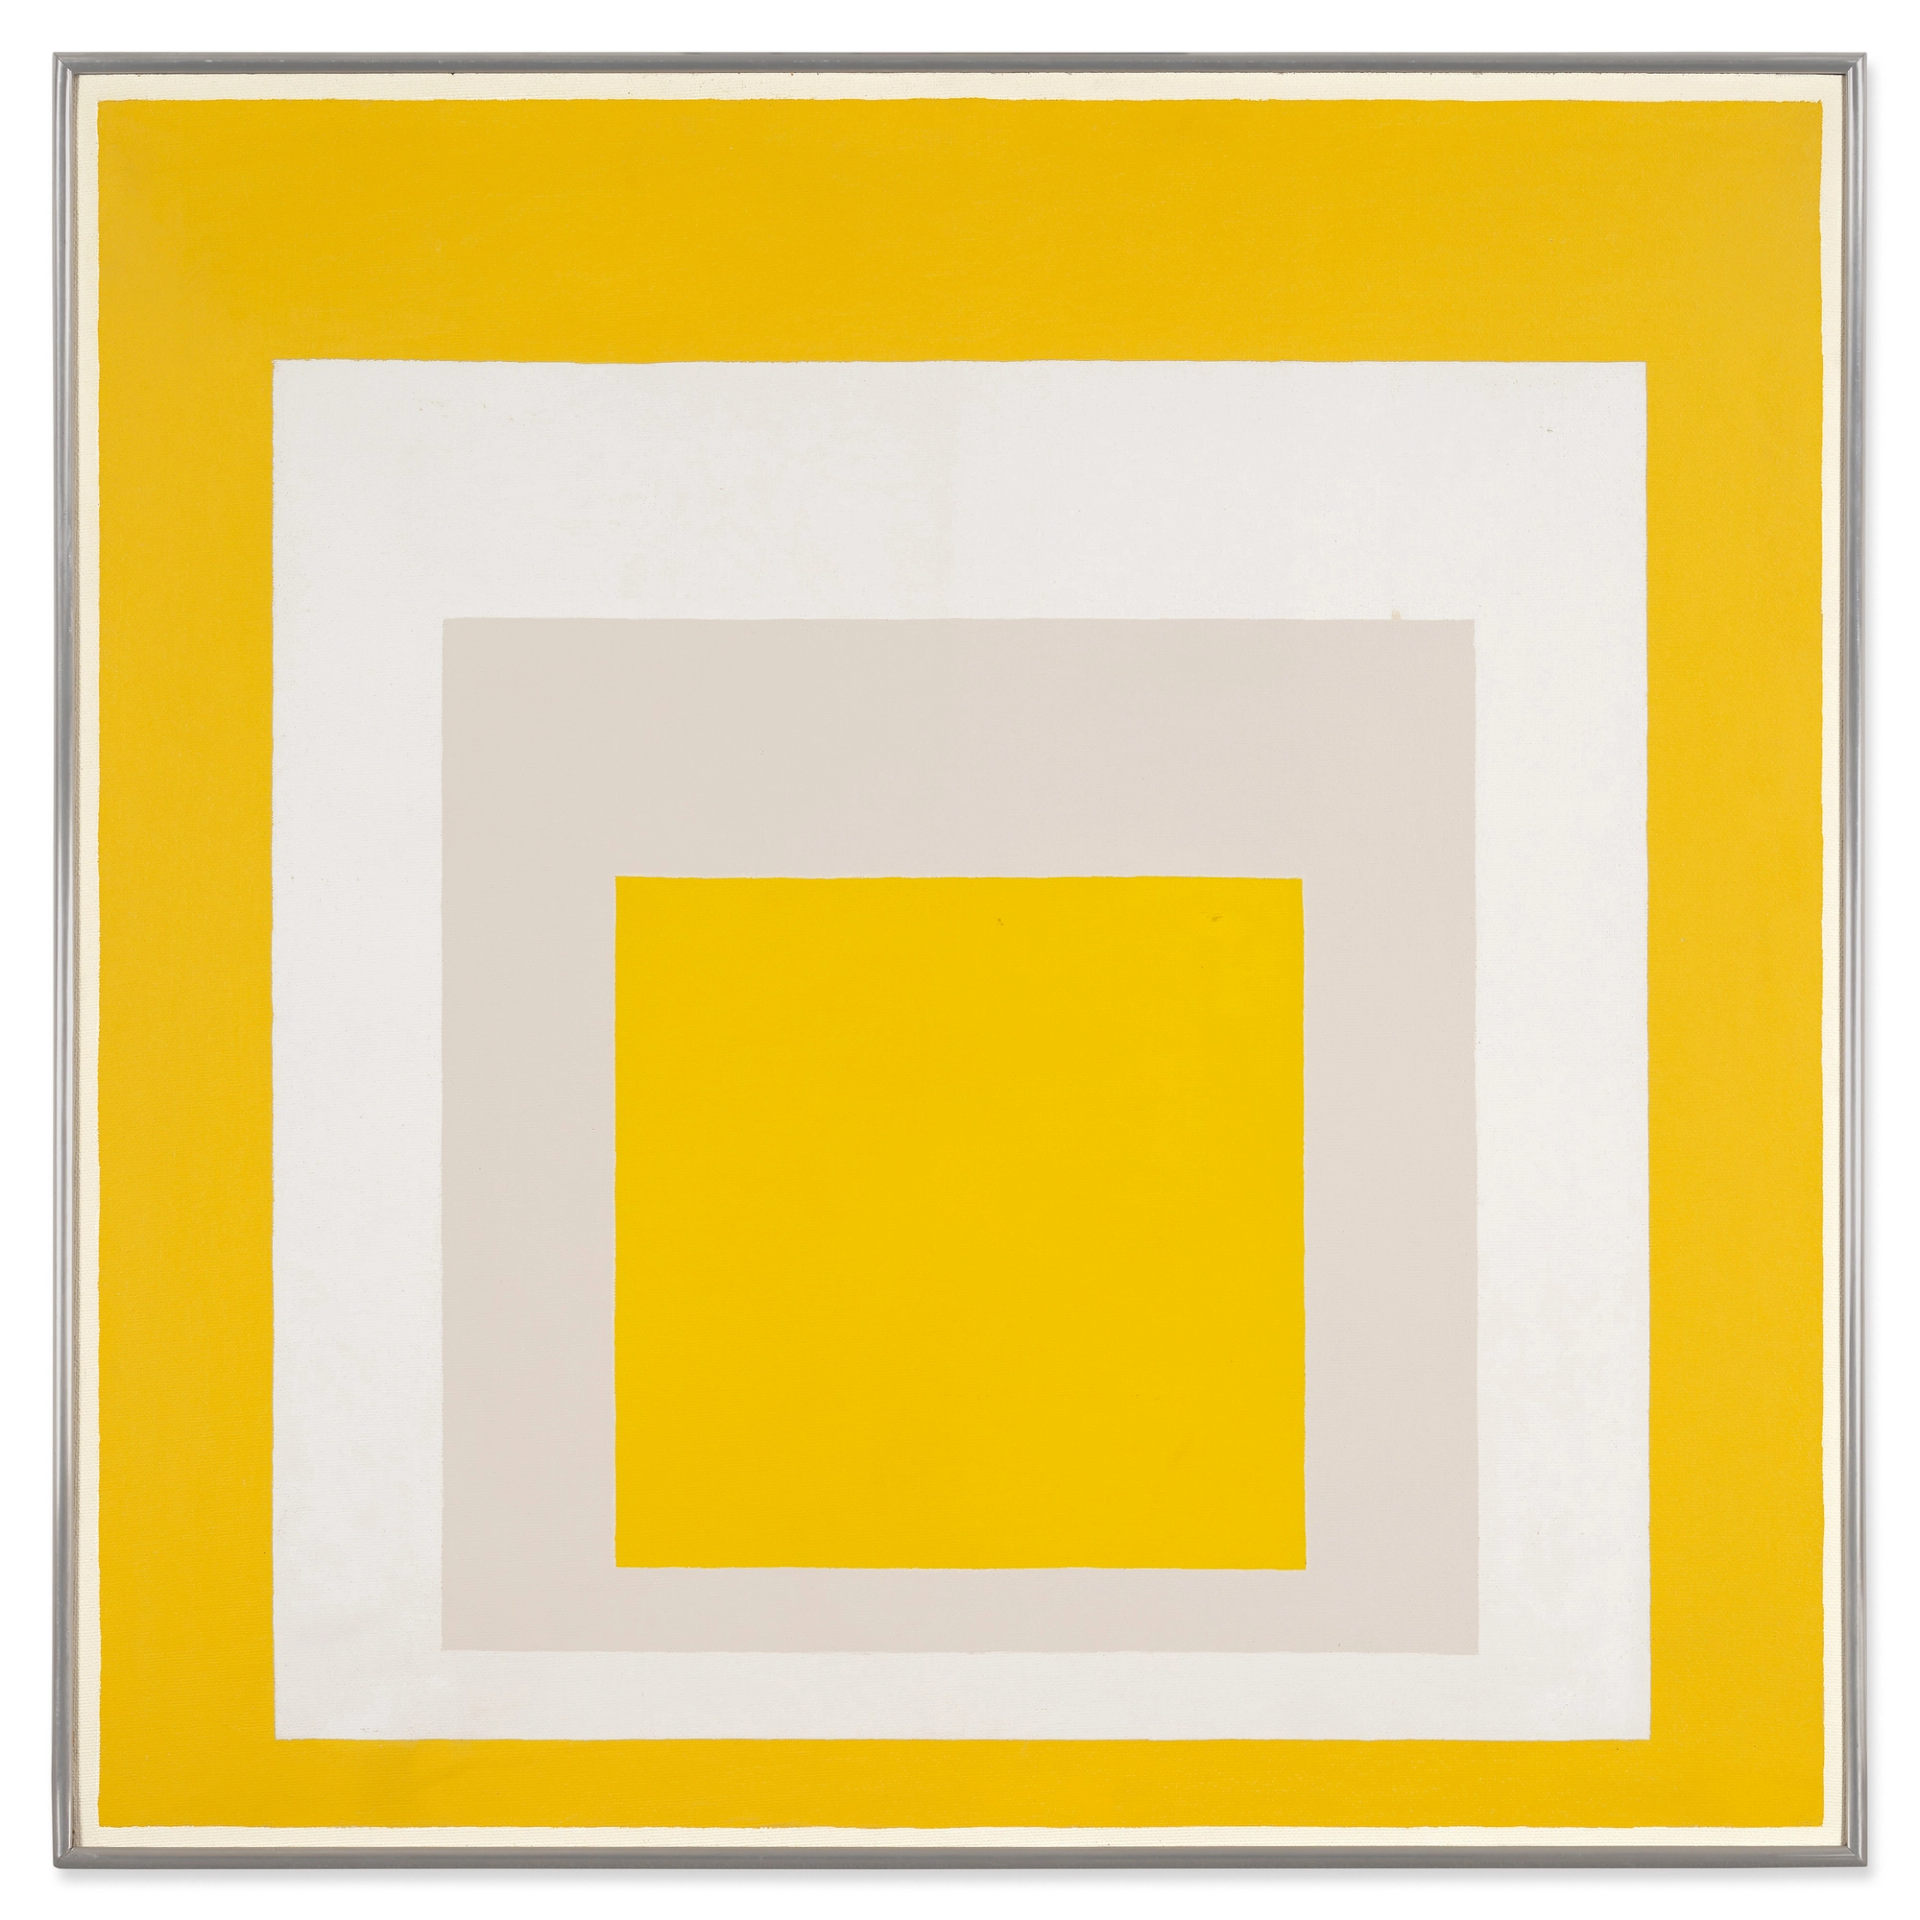 A series of yellow, grey and white squares get increasingly smaller from the centre of the composition.